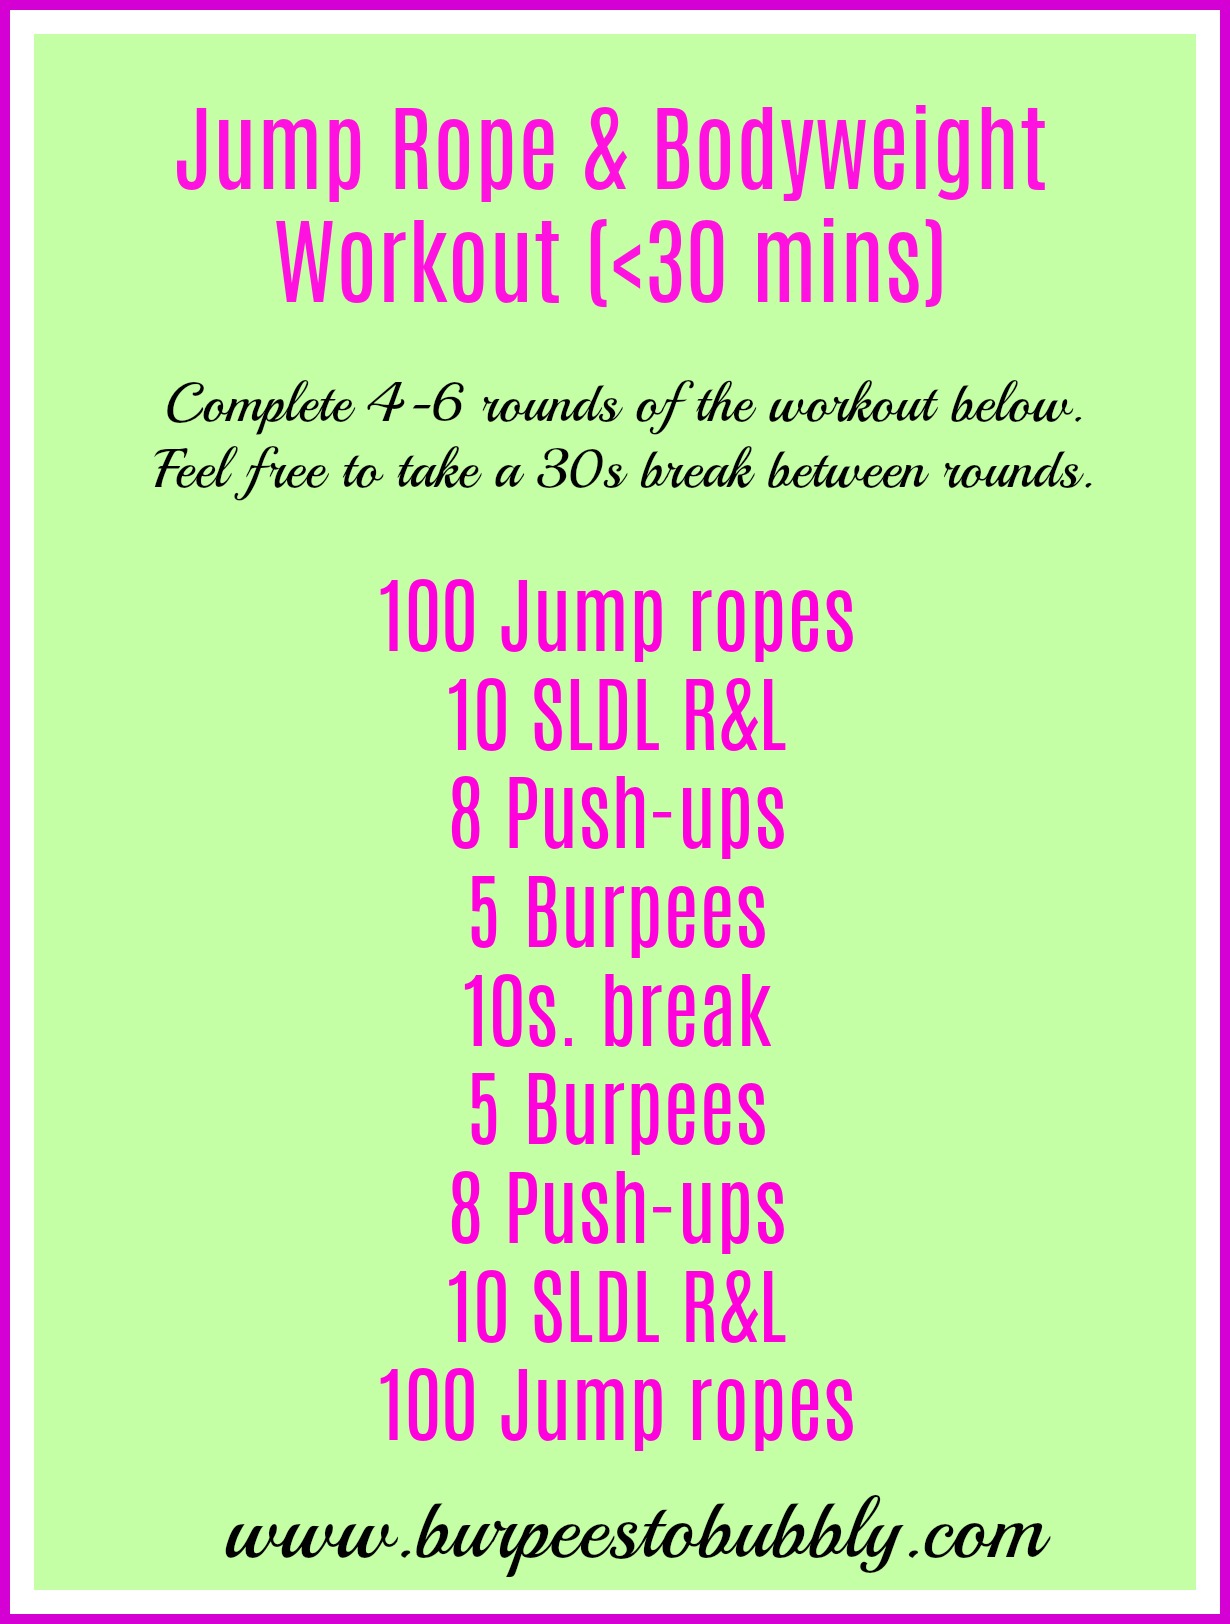 Wednesday Workout: Jump Rope & Bodyweight Workout – Burpees to Bubbly